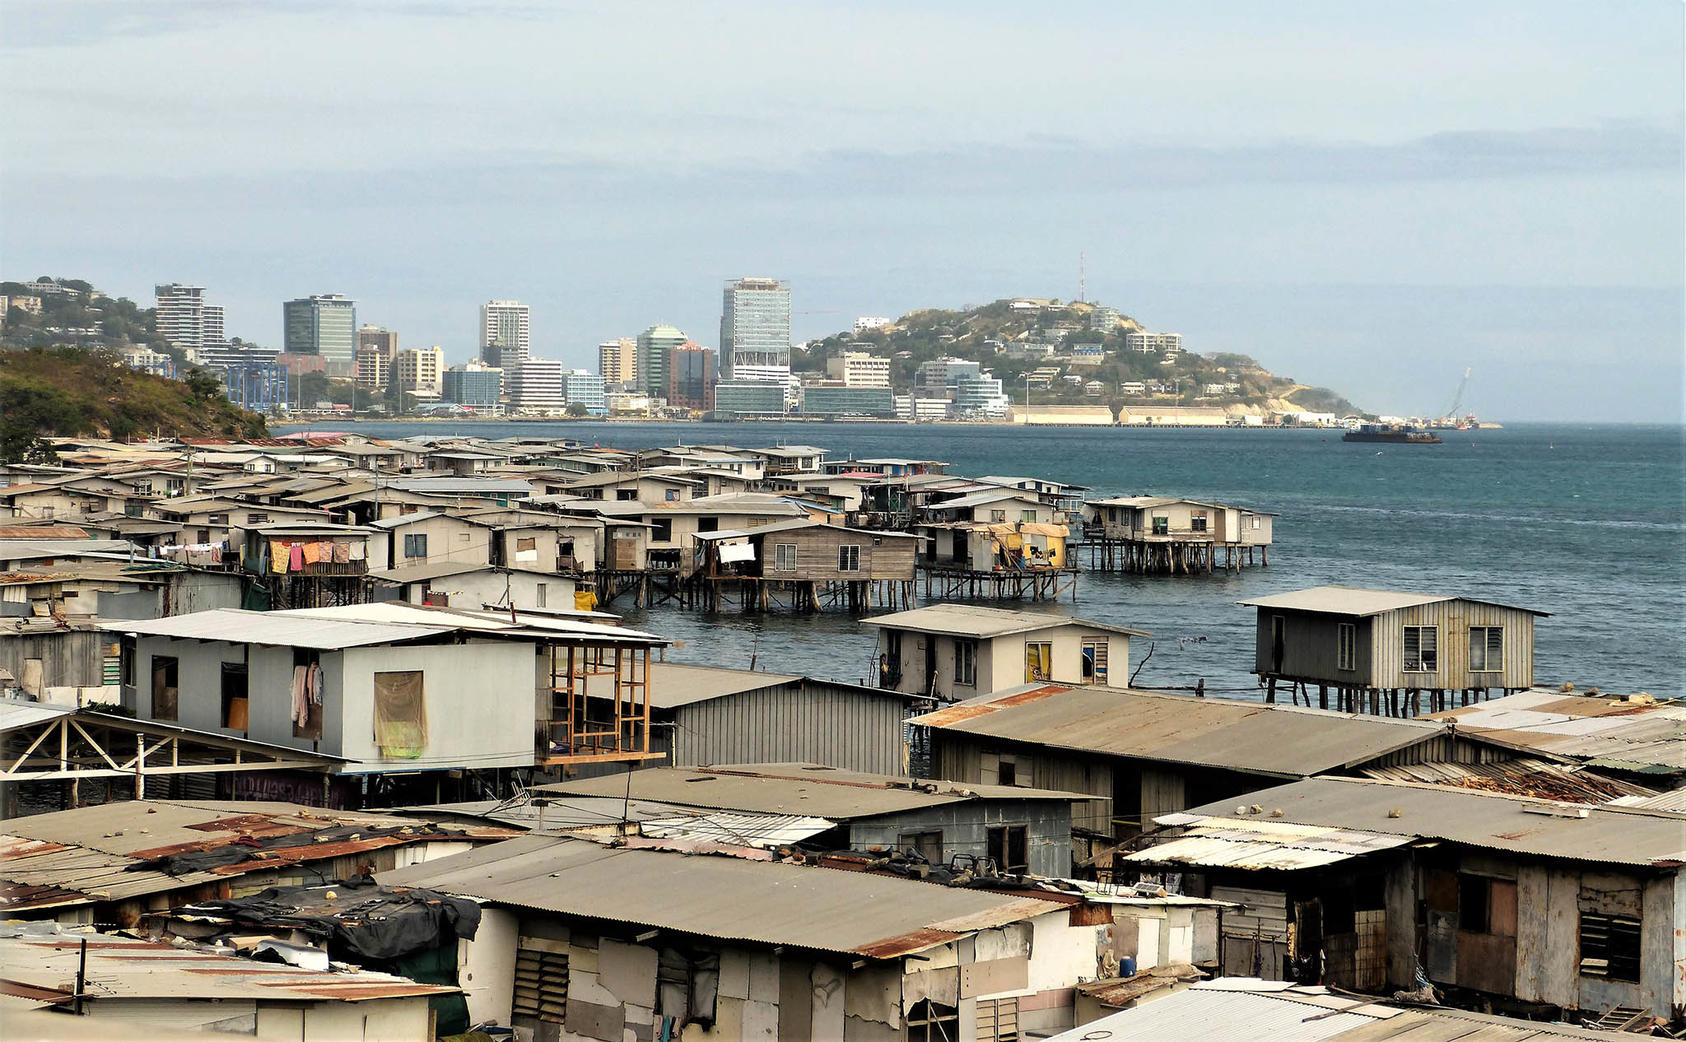 Stilt houses in Port Moresby, the capital of Papua New Guinea. August 6, 2019. (Gail Hampshire/Flickr)